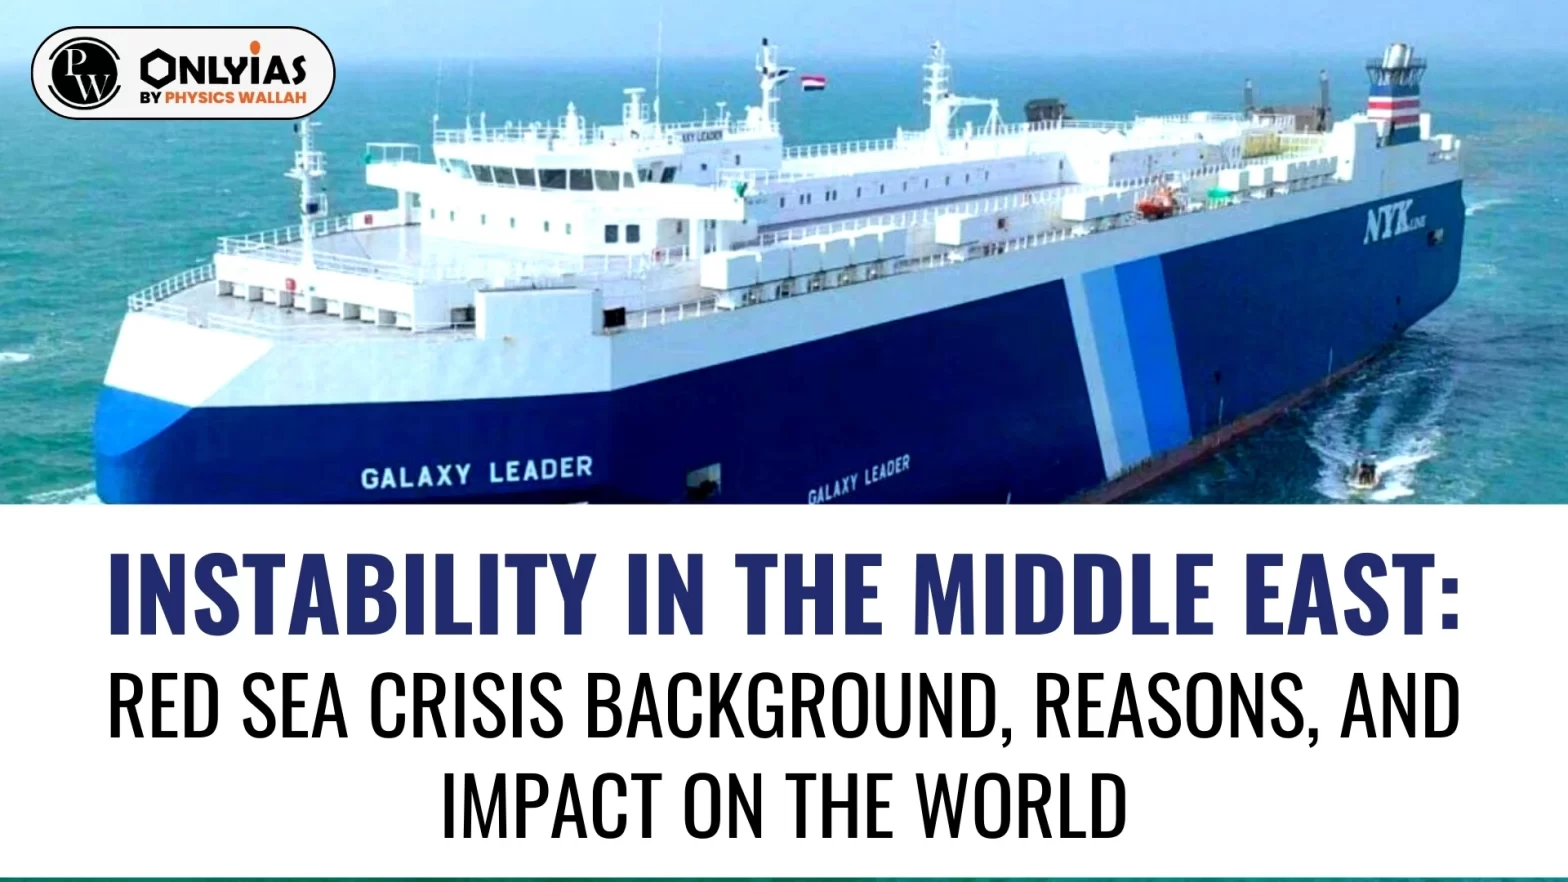 Instability in the Middle East: Red Sea Crisis Background, Reasons, and Impact on the World